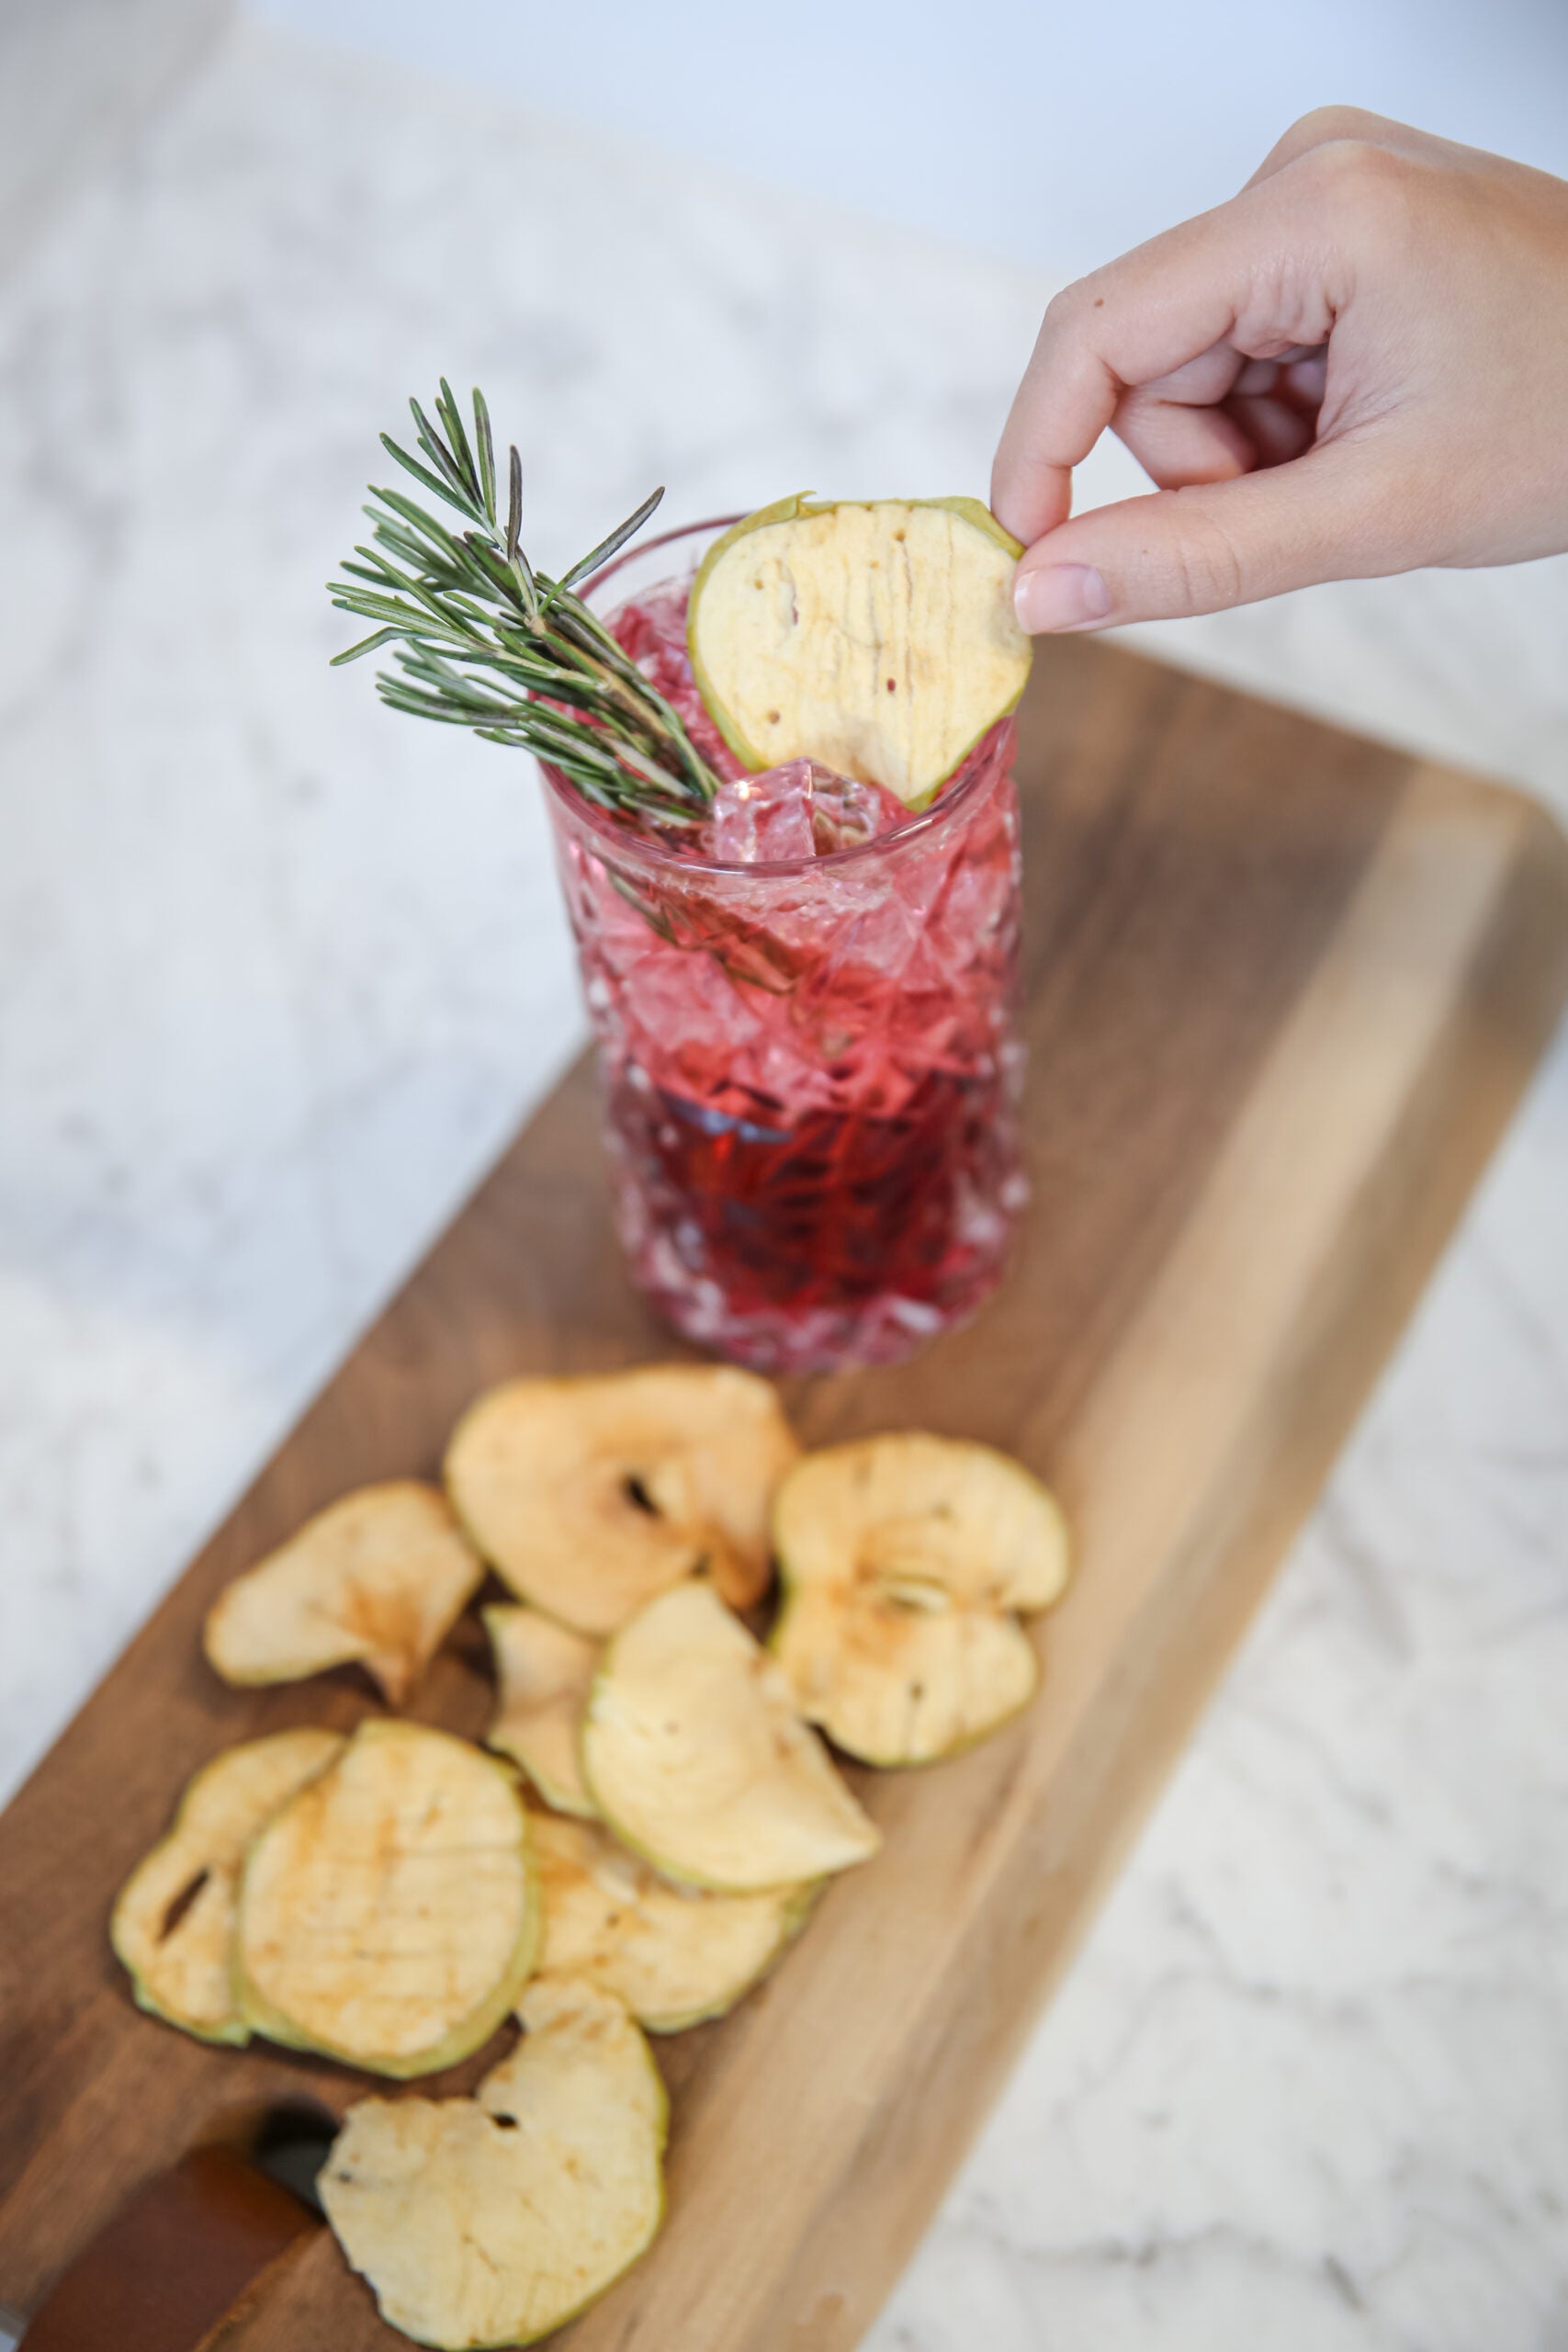 InBooze Dehydrated Fruit Cocktail Garnishes - Perfect for Your Home Bar! Mixed Citrus Garnish